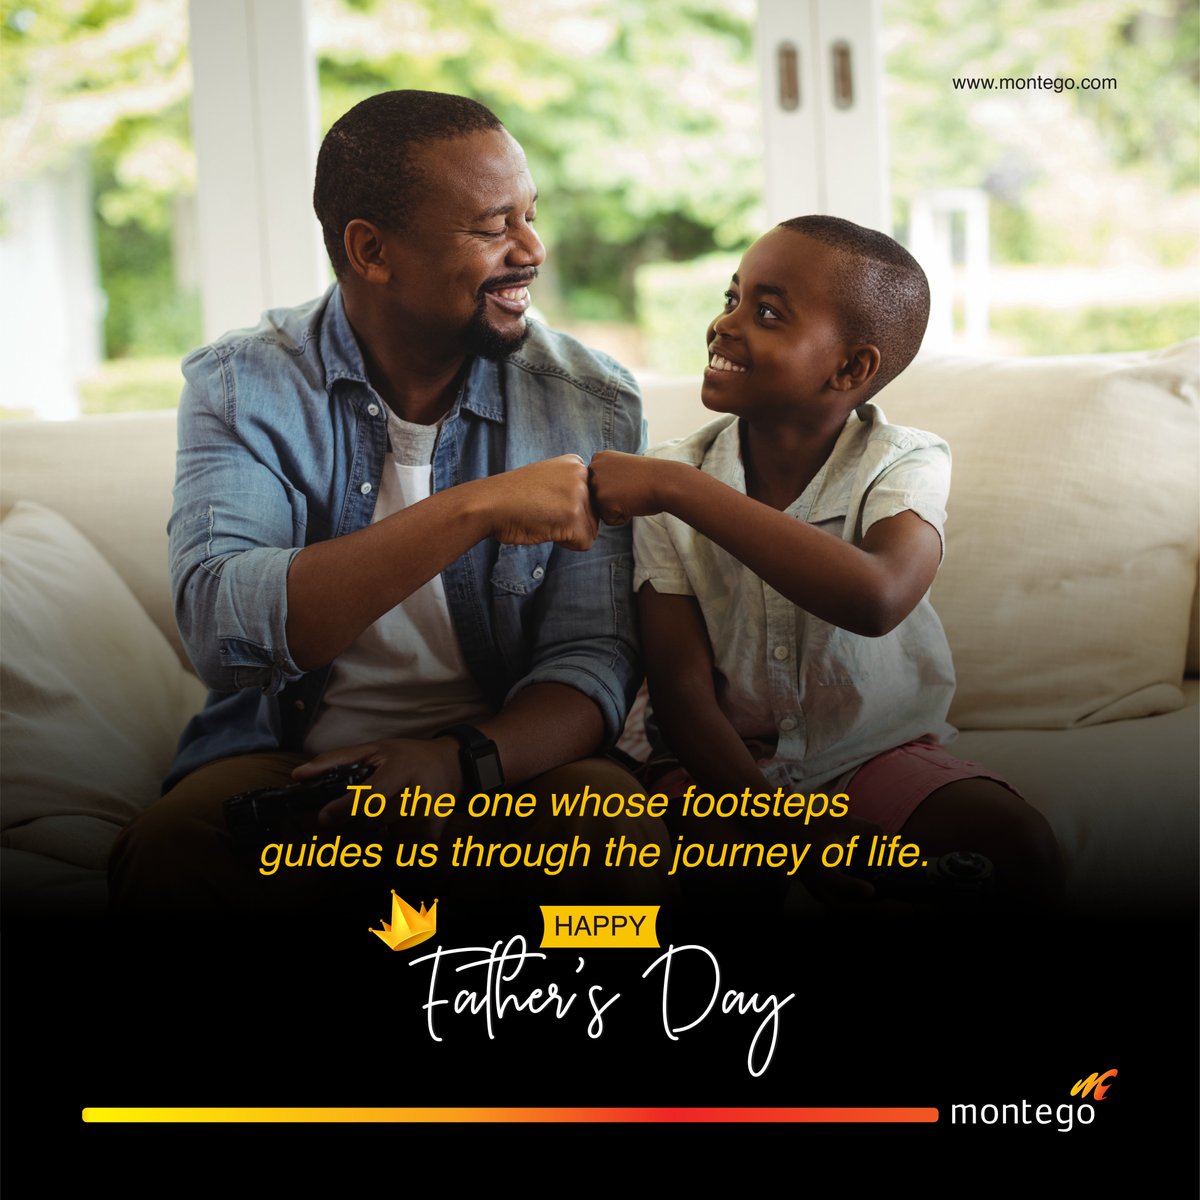 Here is to the best dads in the World!

You are our heroes, our guides, and our biggest fans.
We celebrate our fathers' and father figures' strength, sacrifices, and love.

HAPPY FATHER'S DAY.
#fathersday #love #fatherlylove #MontegoCelebrations #MontegoGroup